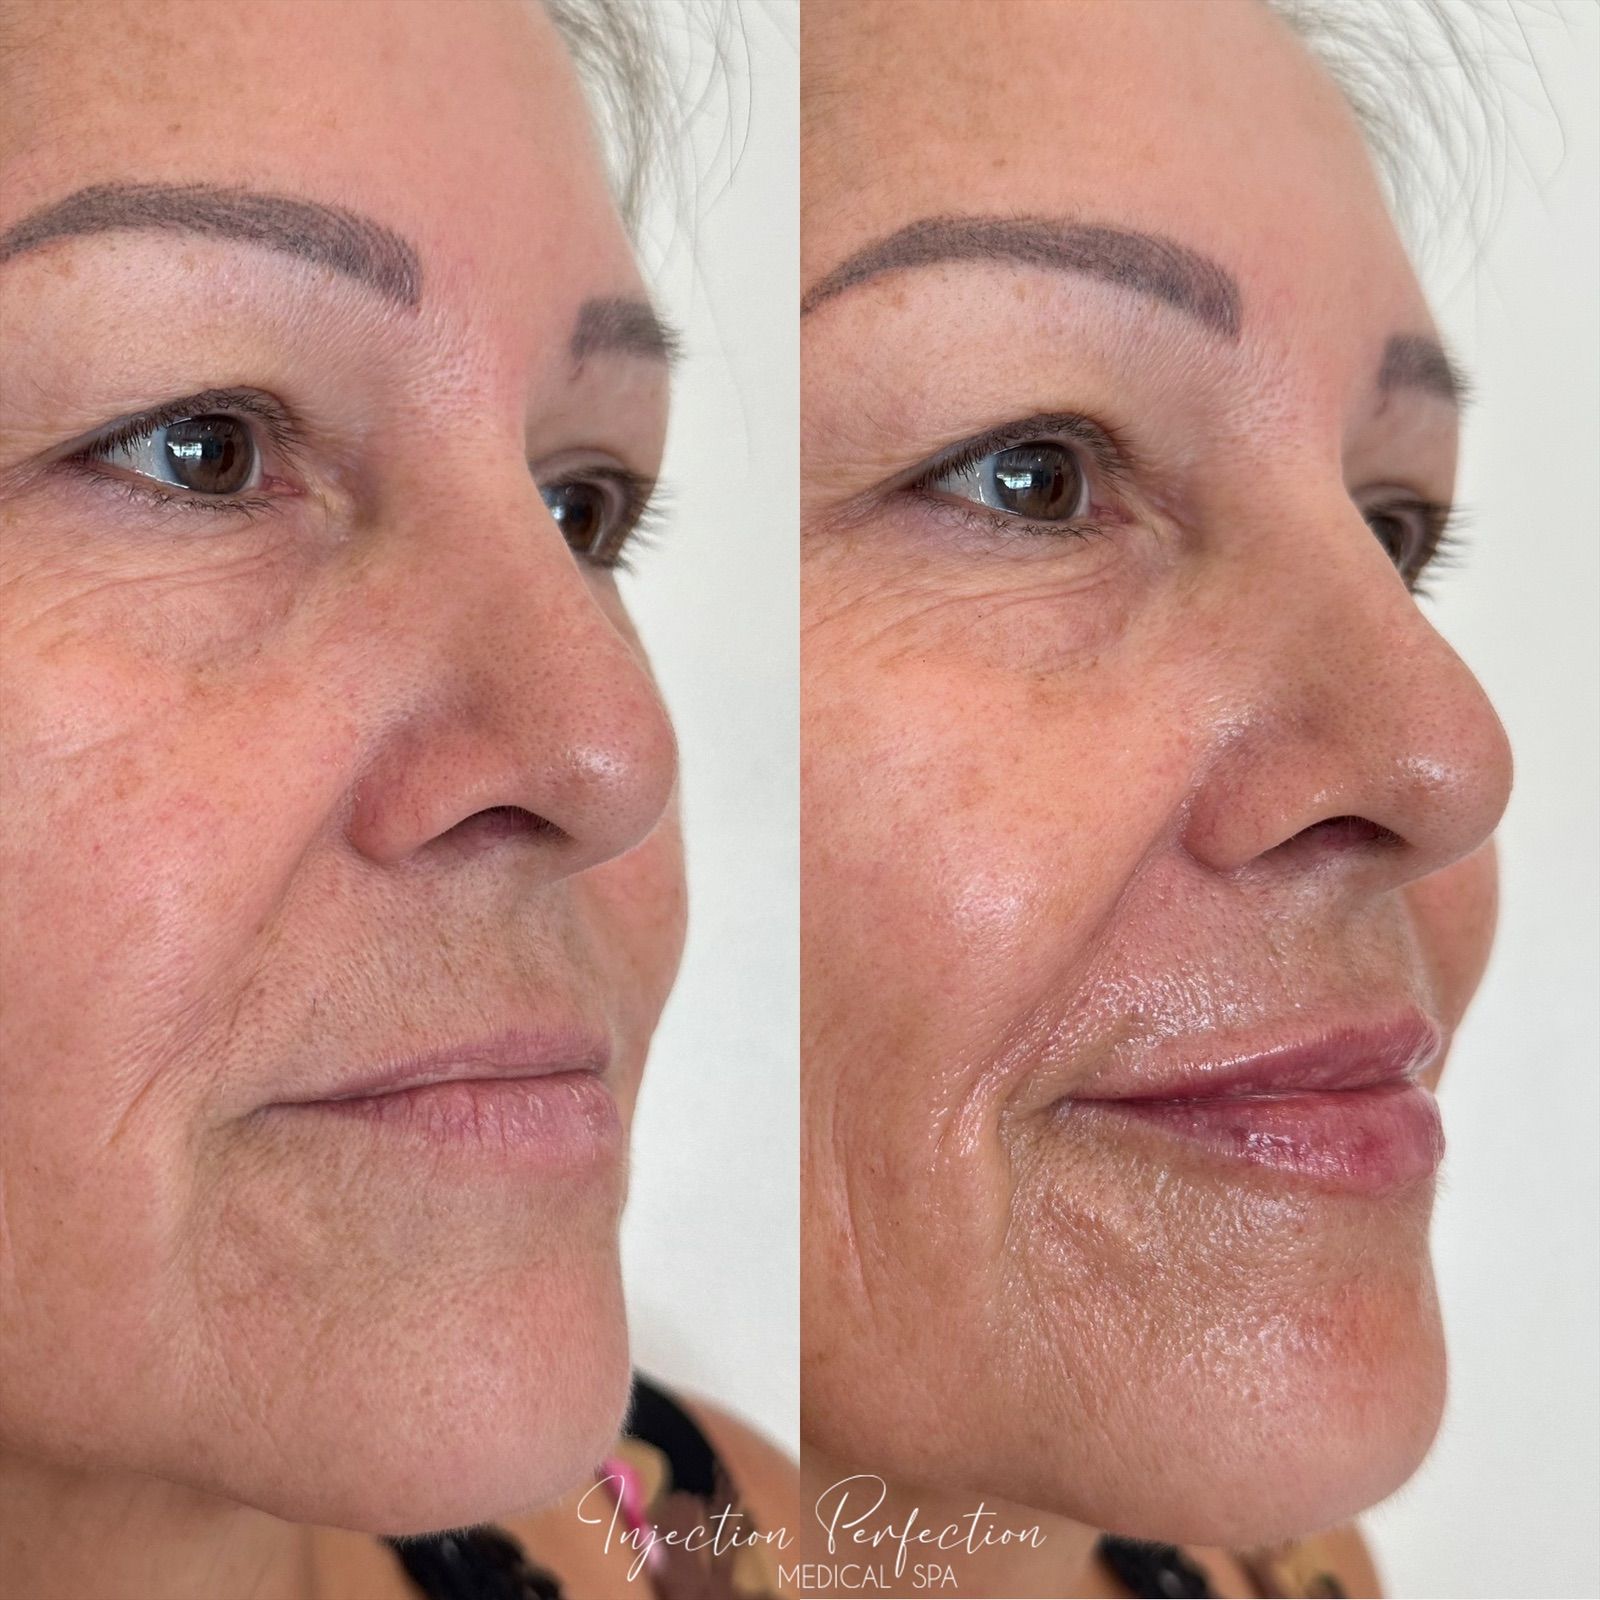 Before and after photo of lip filler treatment